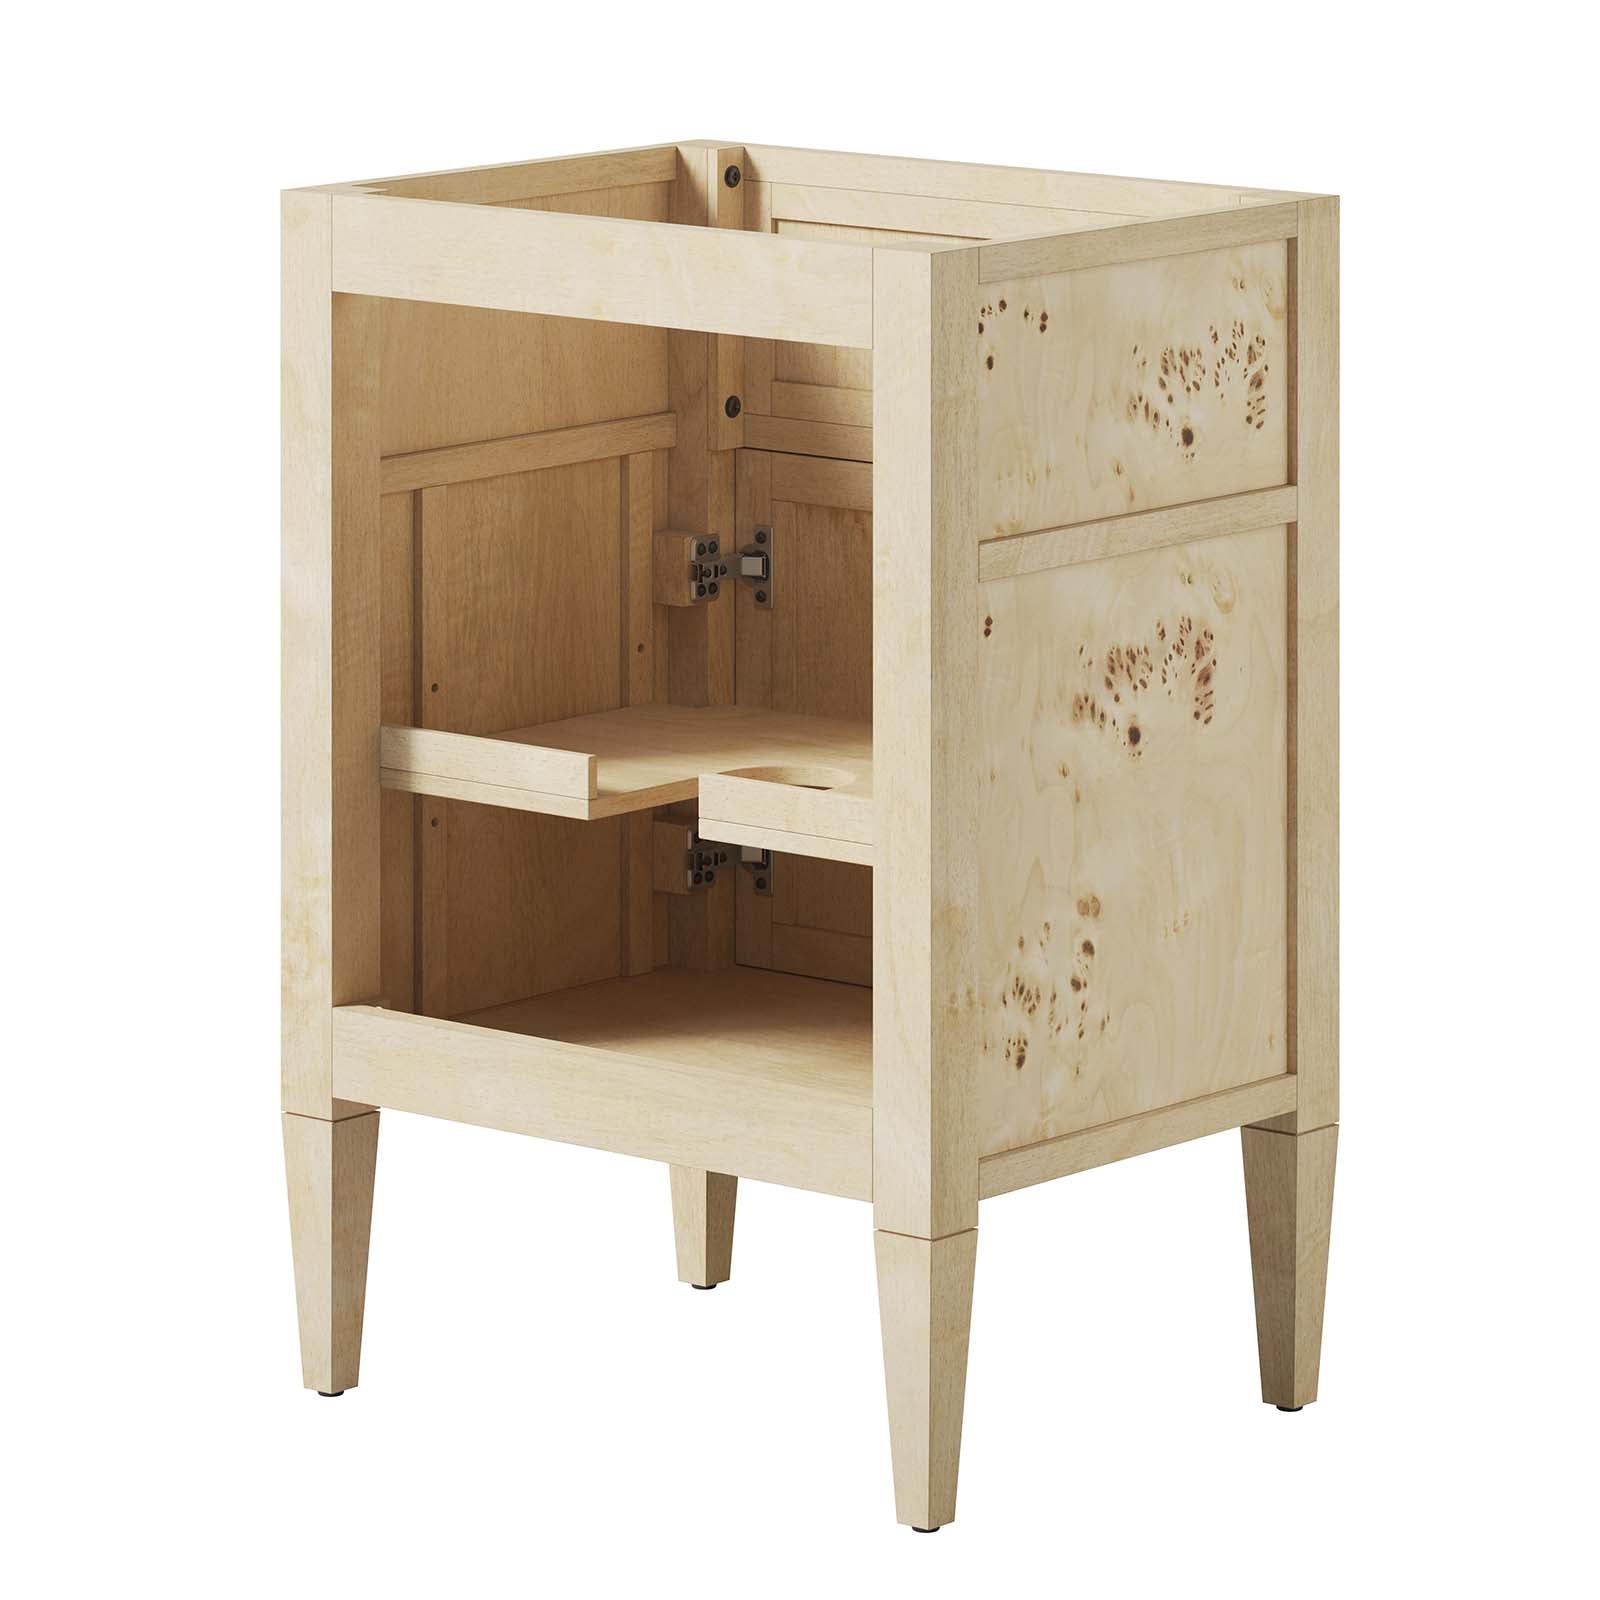 Elysian 24" Wood Bathroom Vanity Cabinet (Sink Basin Not Included) By Modway - EEI-6137 | Bathroom Accessories | Modway - 13